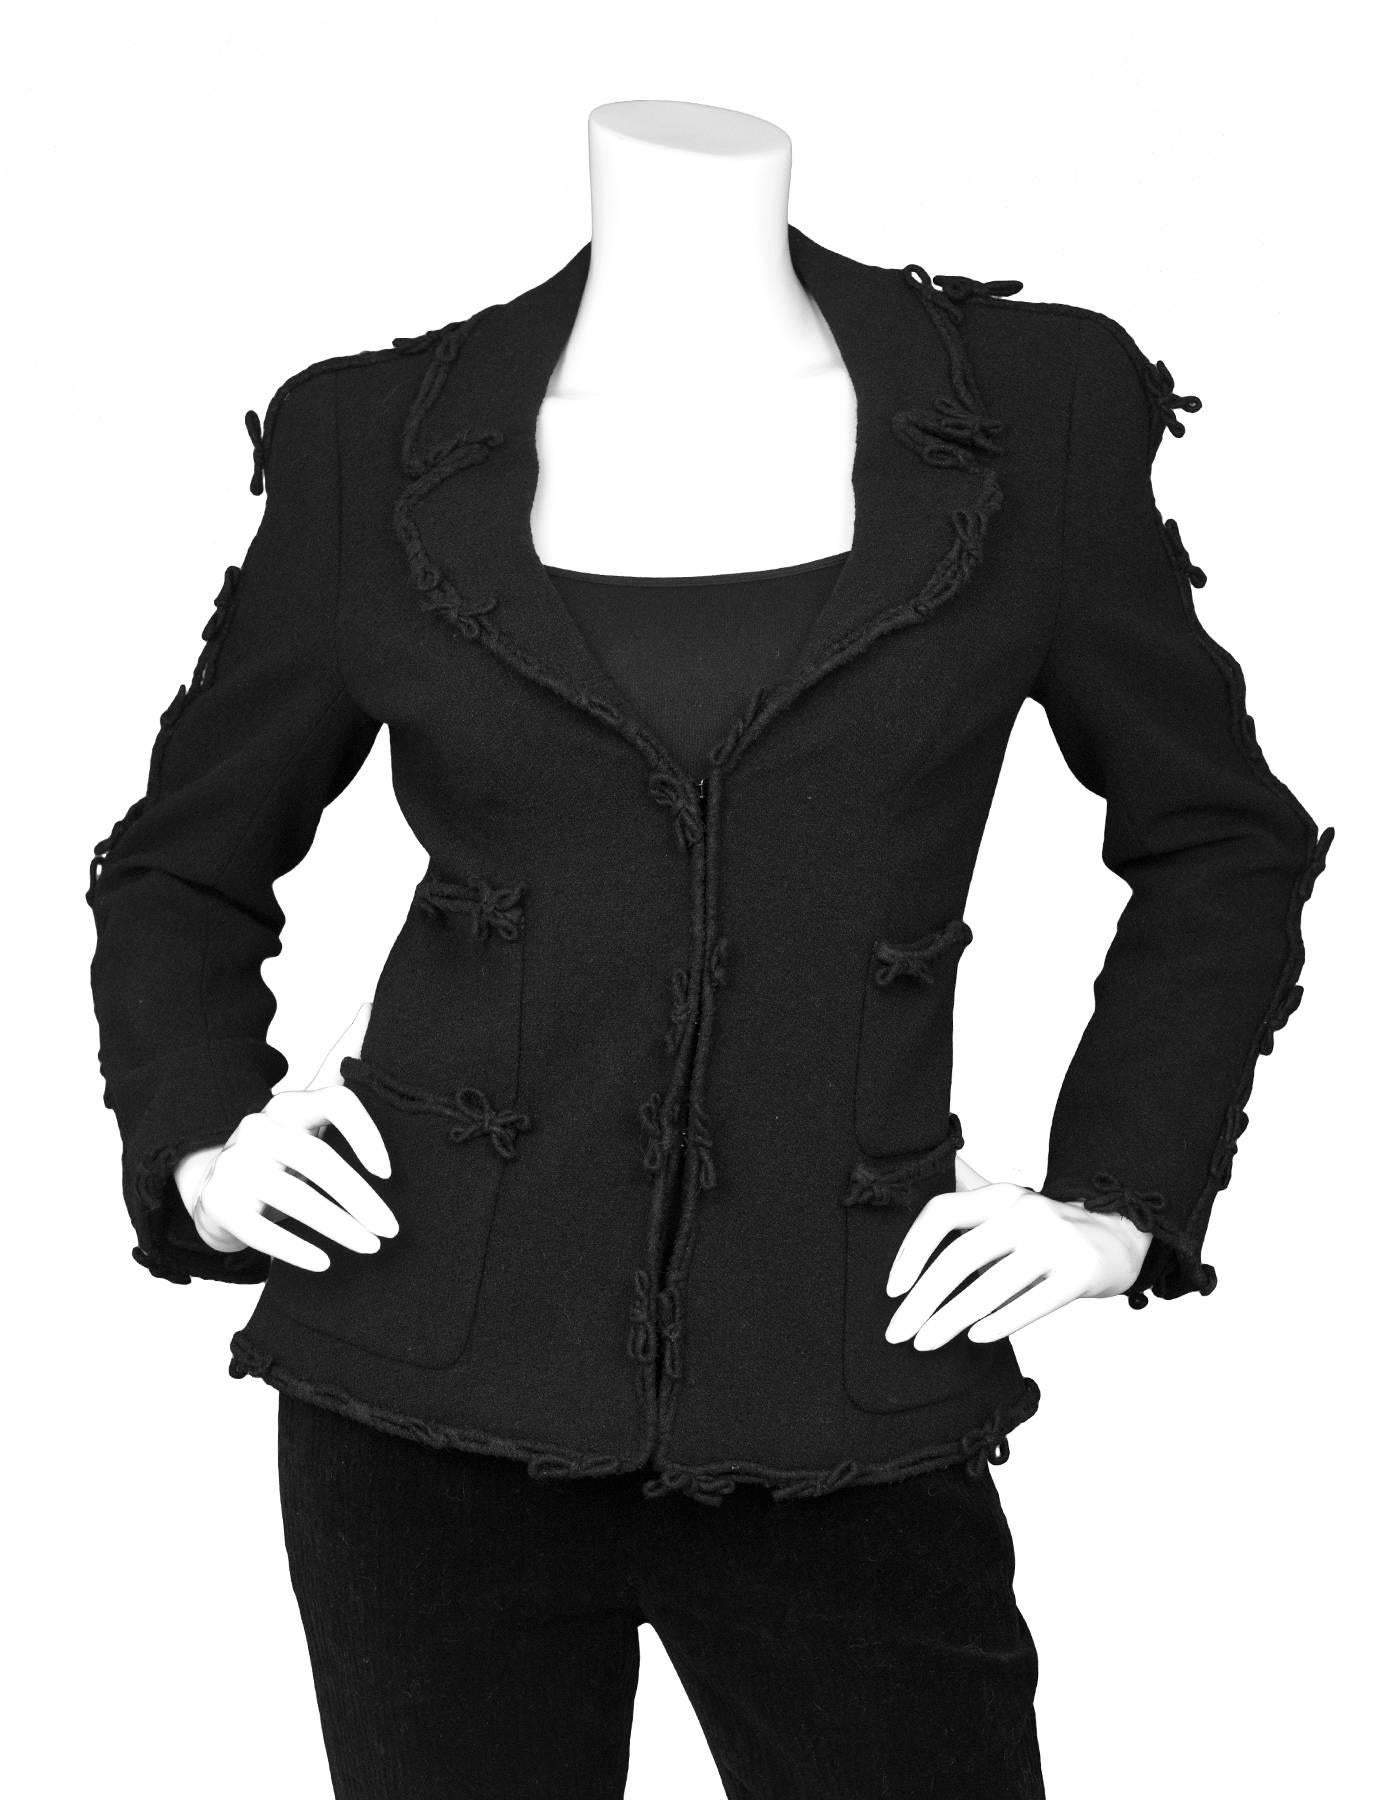 Chanel Black Wool Jacket with Bow Trim Detail Sz FR38

Made In: France
Color: Black
Composition: 84% wool, 16% nylon
Lining: Black, 100% silk
Closure/Opening: Front hook and eye closure
Exterior Pockets: Four front pockets
Overall Condition: